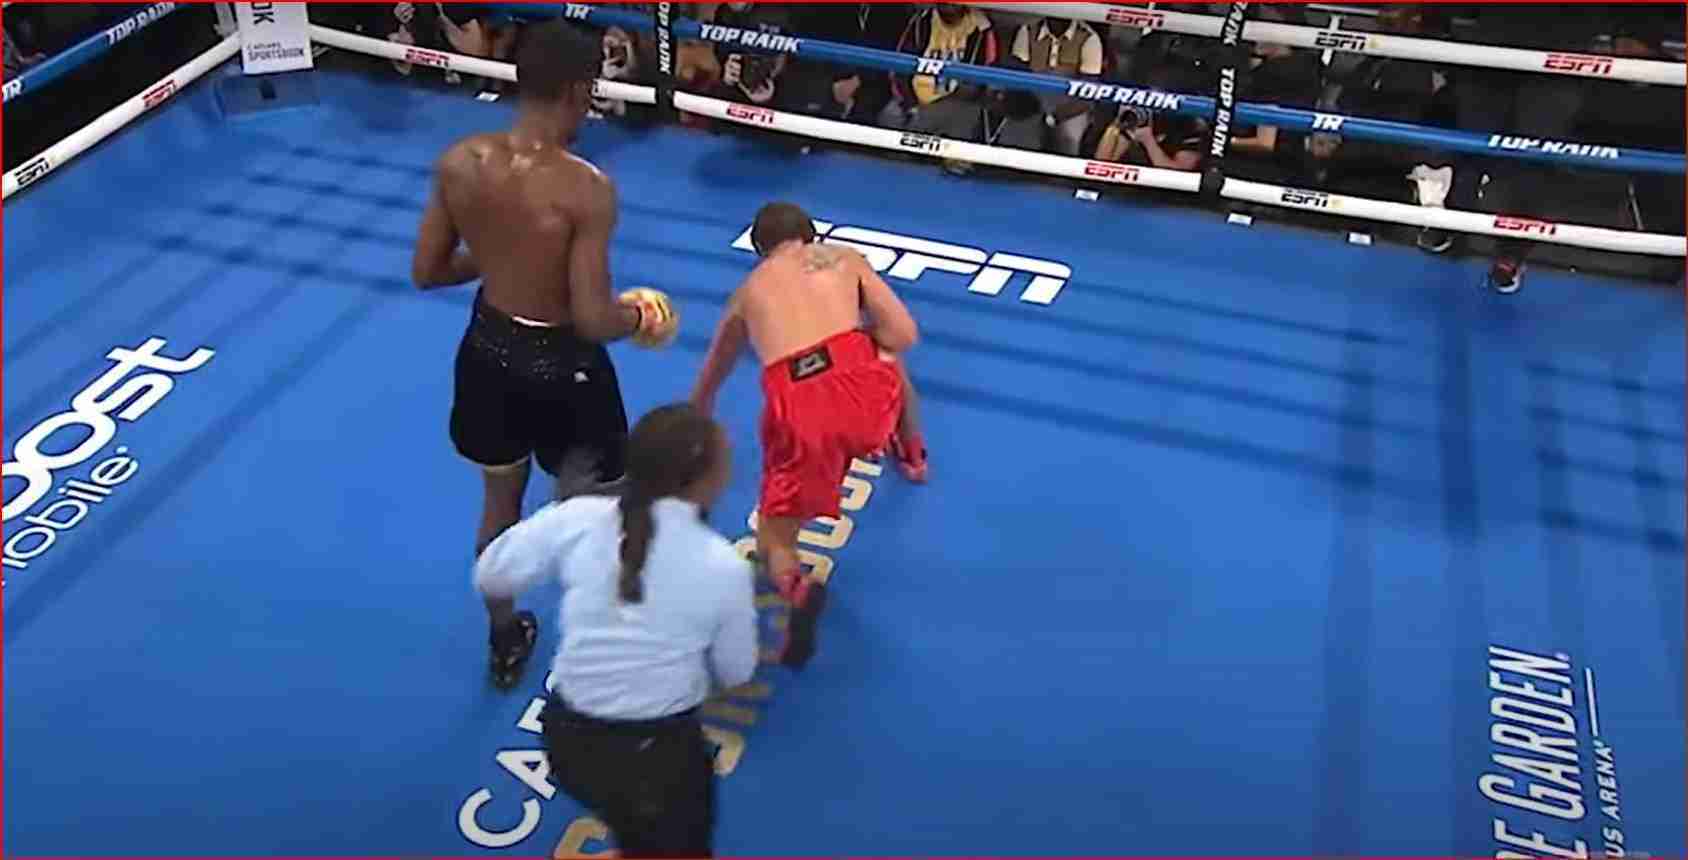 Watch: Boxer hits opponent so hard mouthpiece dislodged